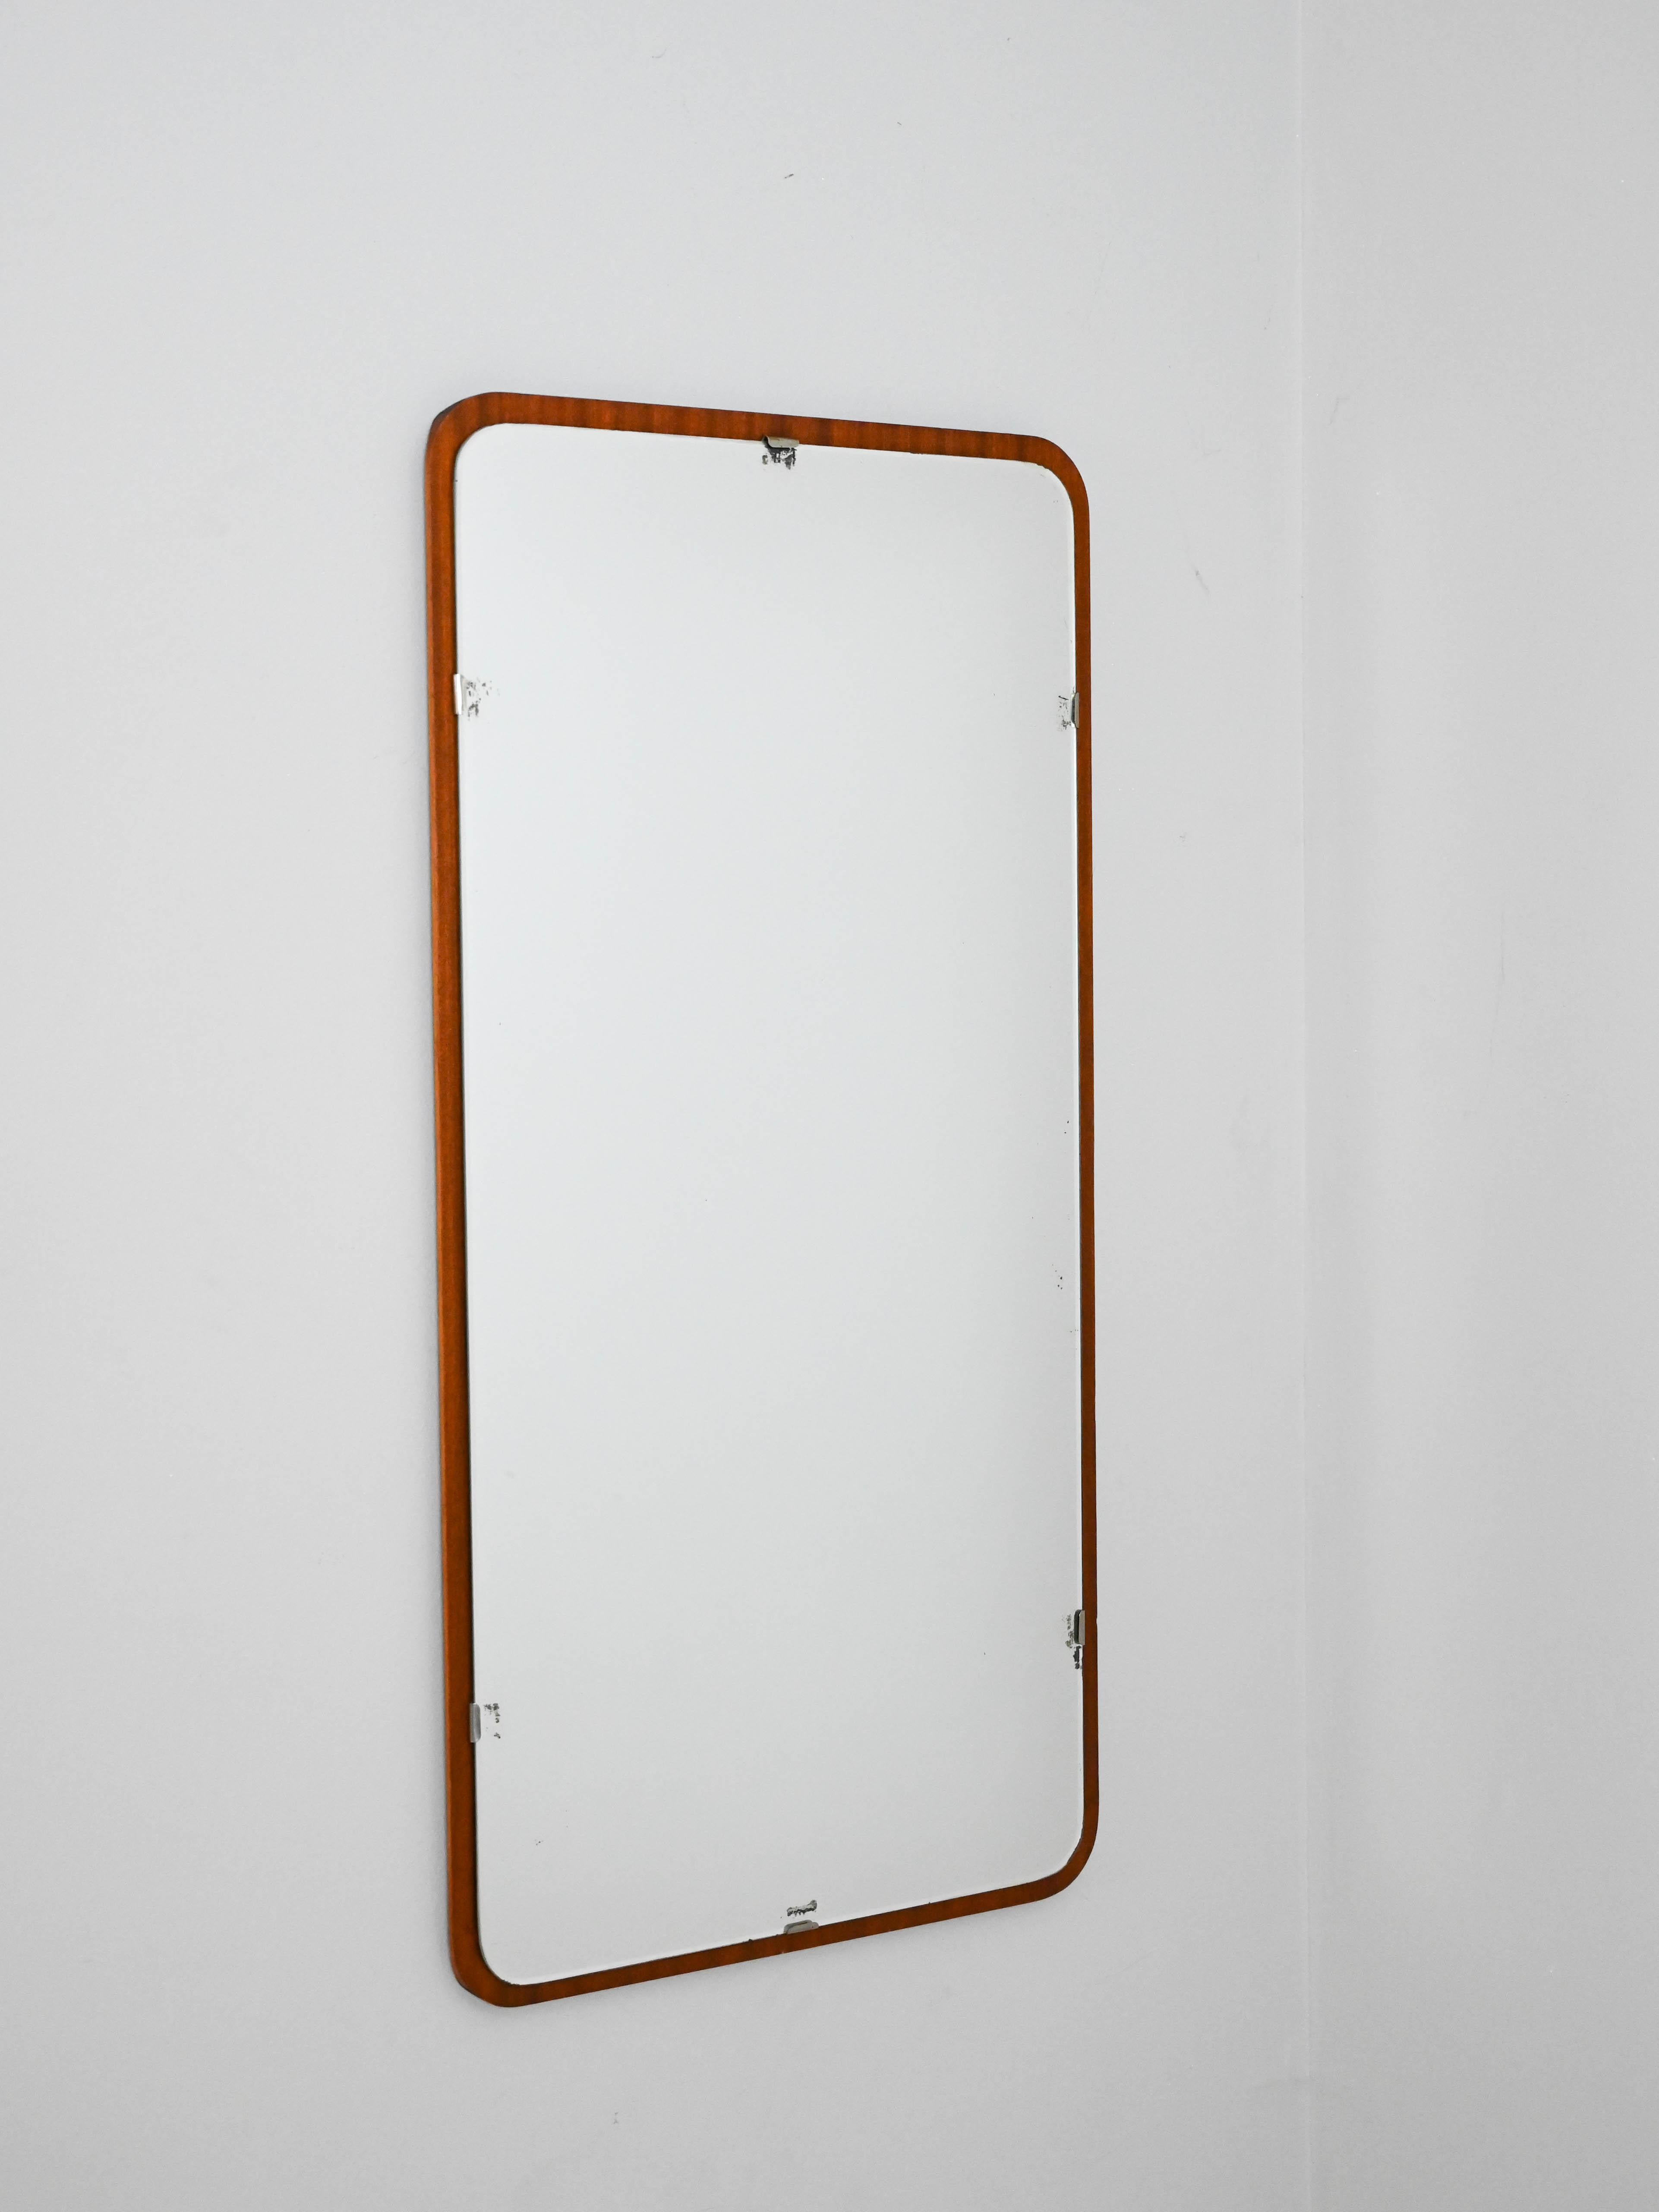 Swedish vintage mirror.

A mirror with a retro feel and typical midcentury style. The teak frame with rounded edges is thin and minimal.
Ideal if you want to give a vintage touch to the room.

Good condition. Mirror may show some signs of